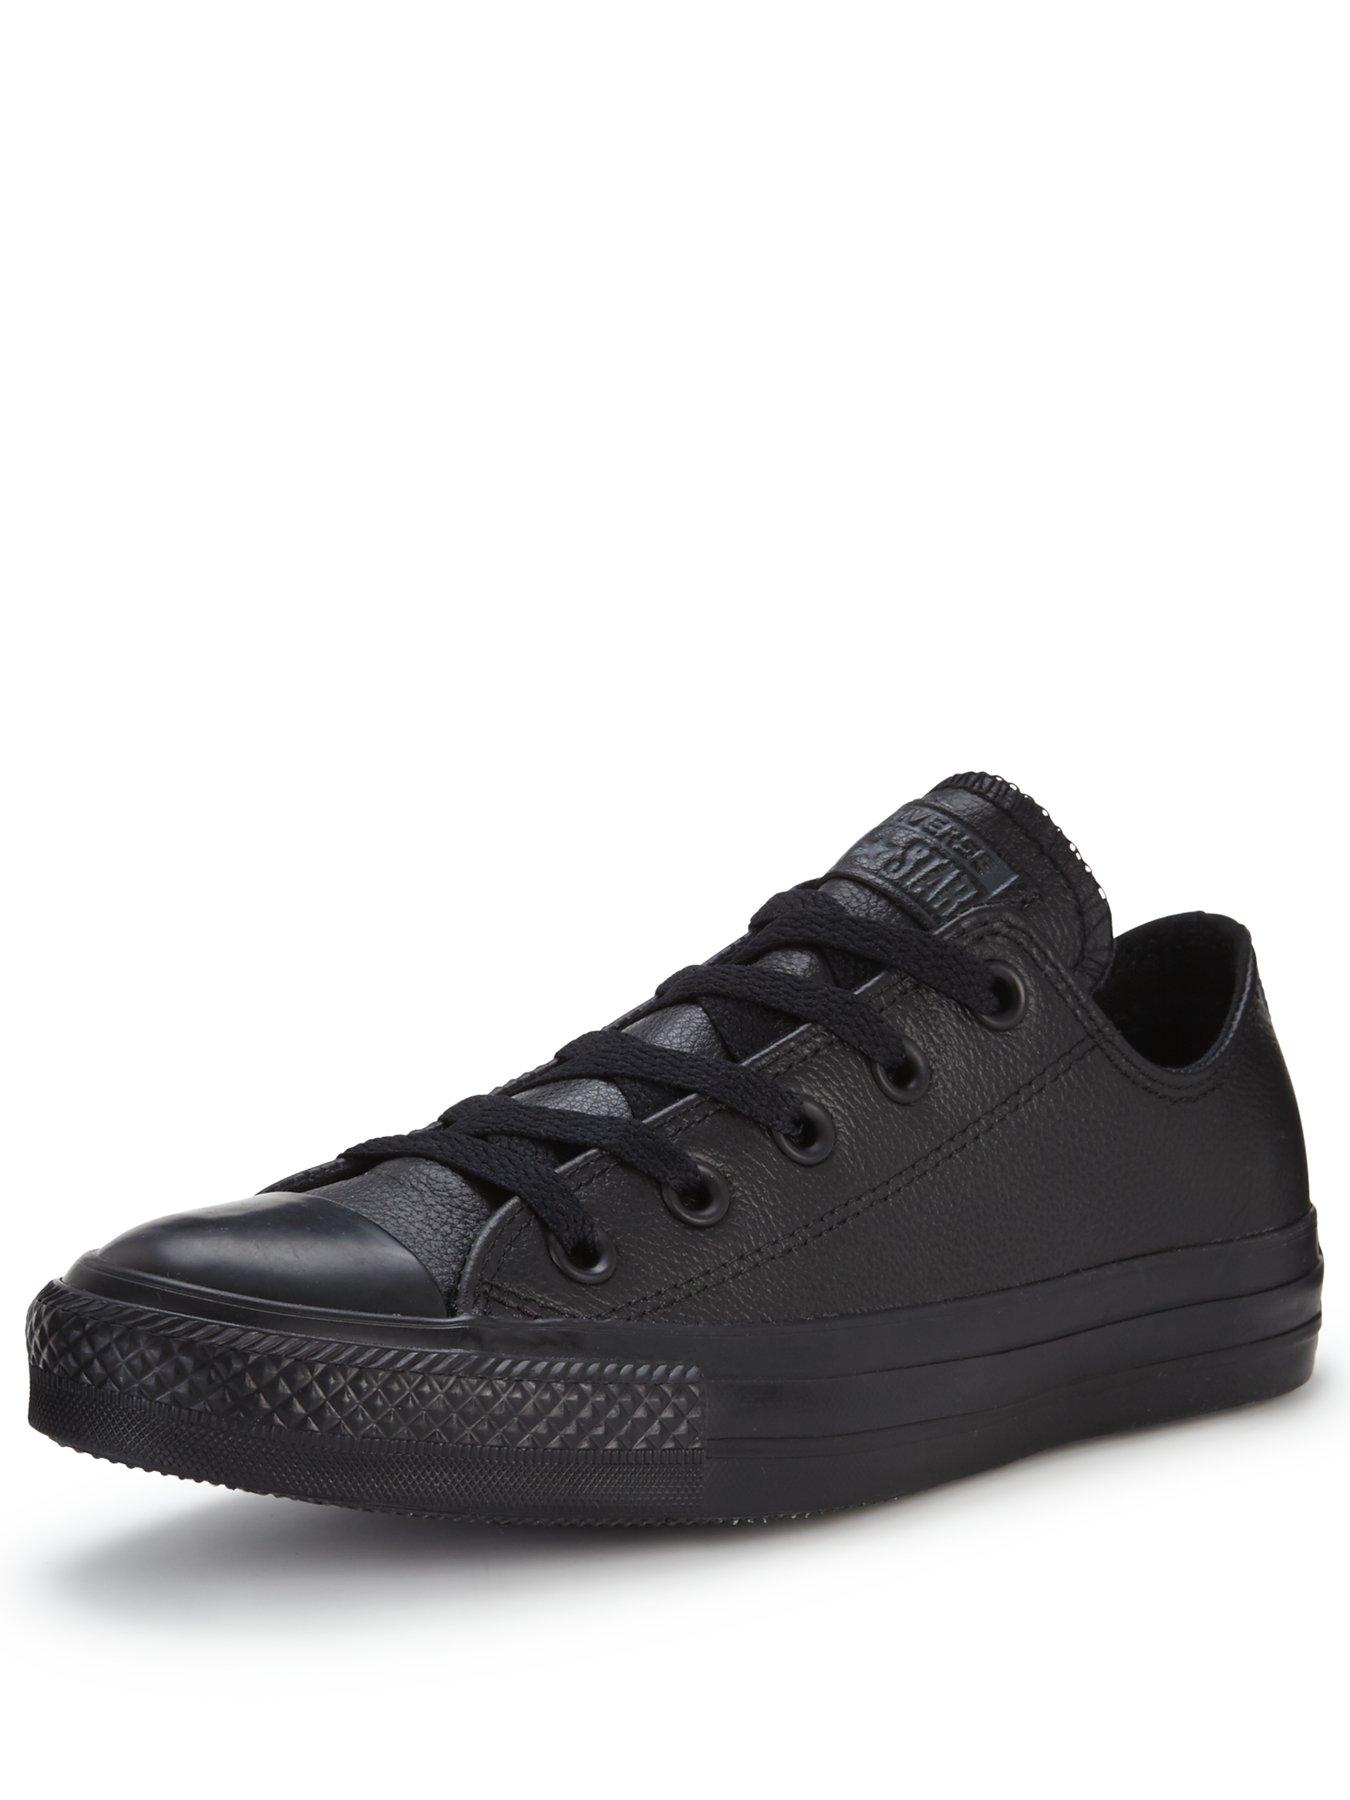 all black leather converse